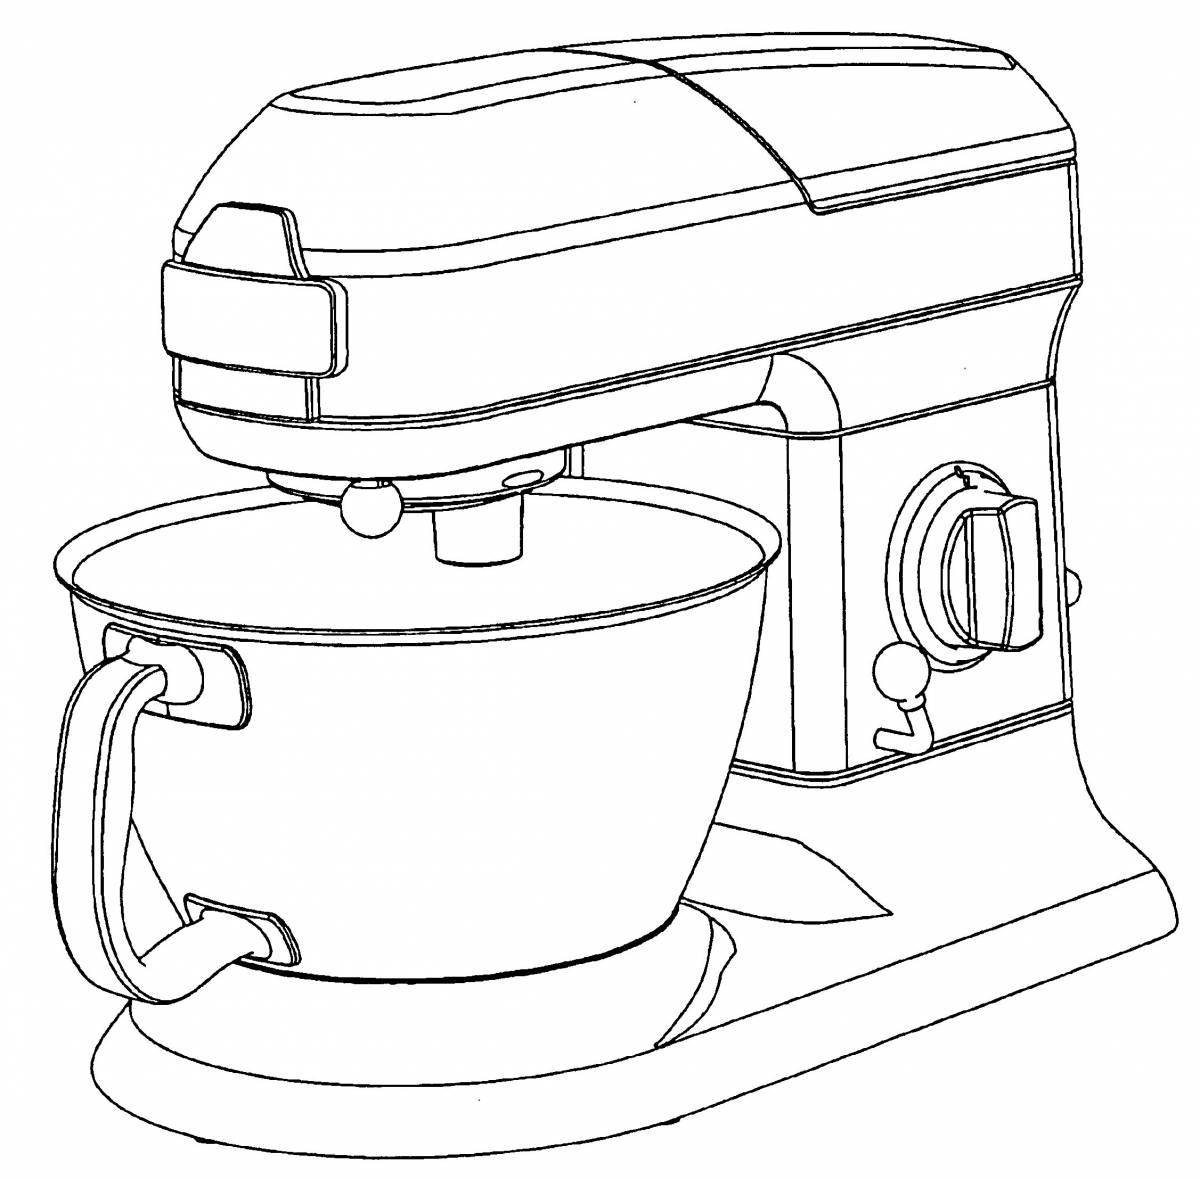 Coloring pages of household appliances for children 5-6 years old